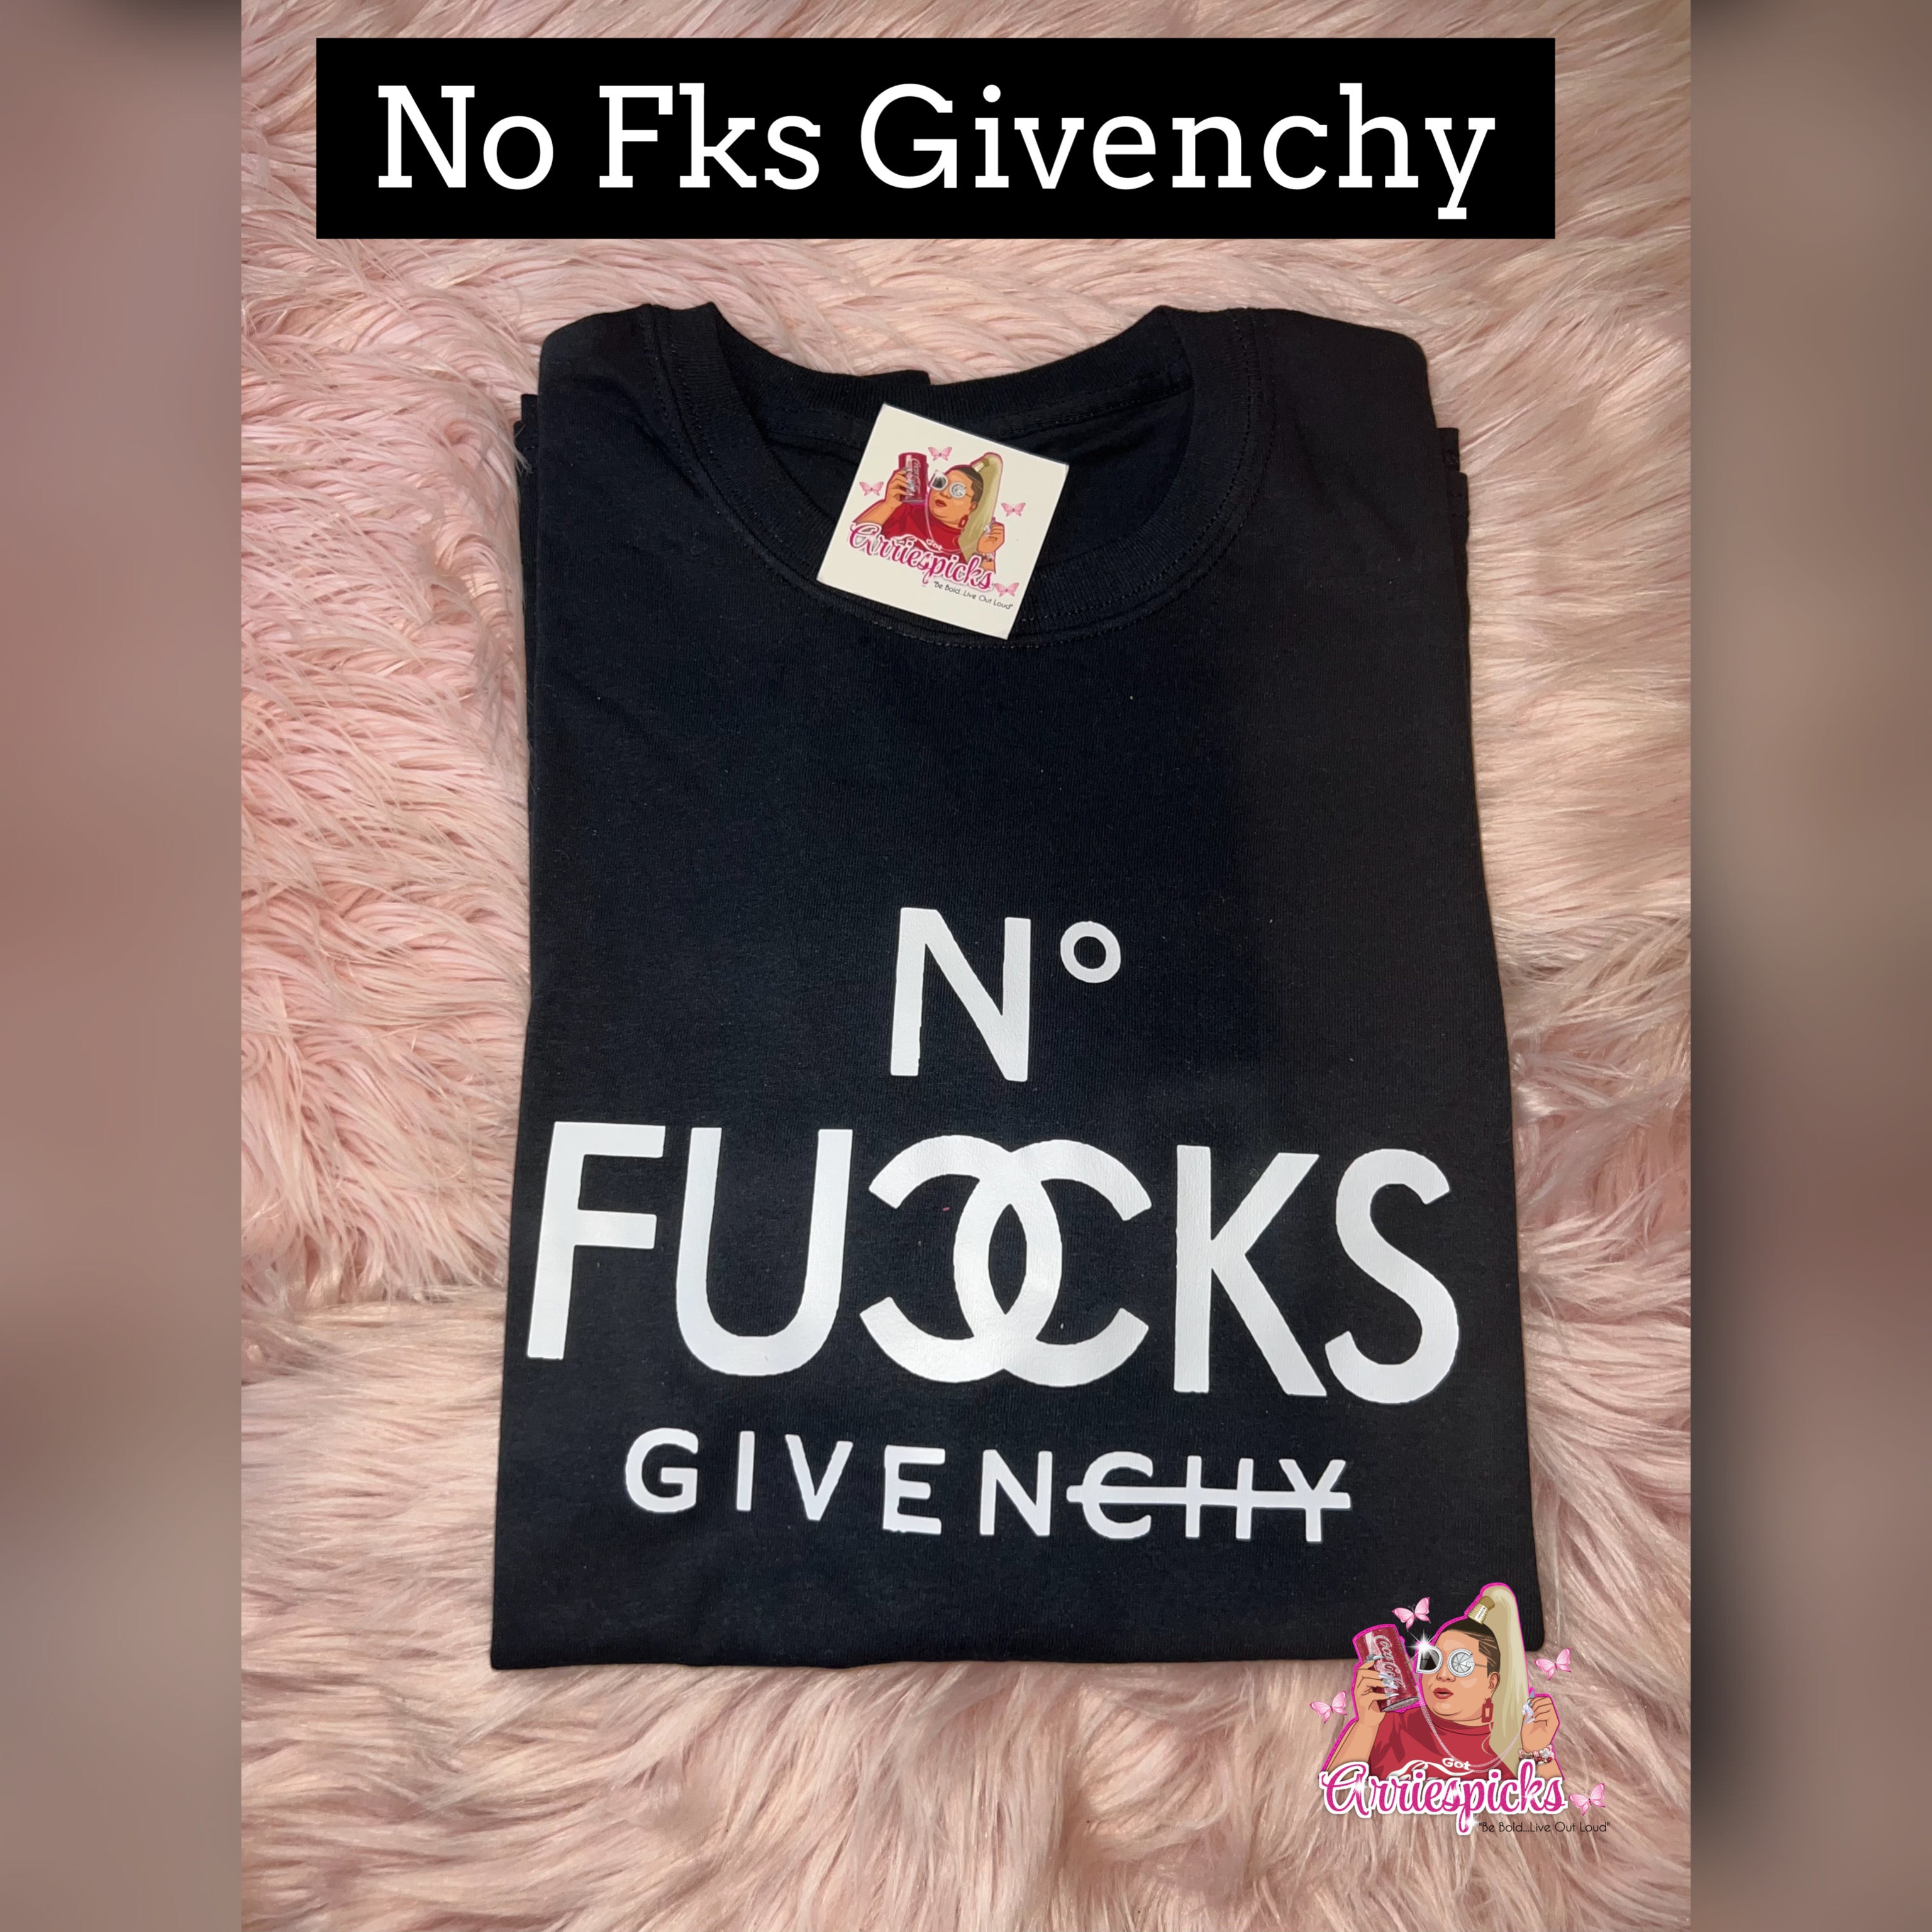 No Fks Given-chy